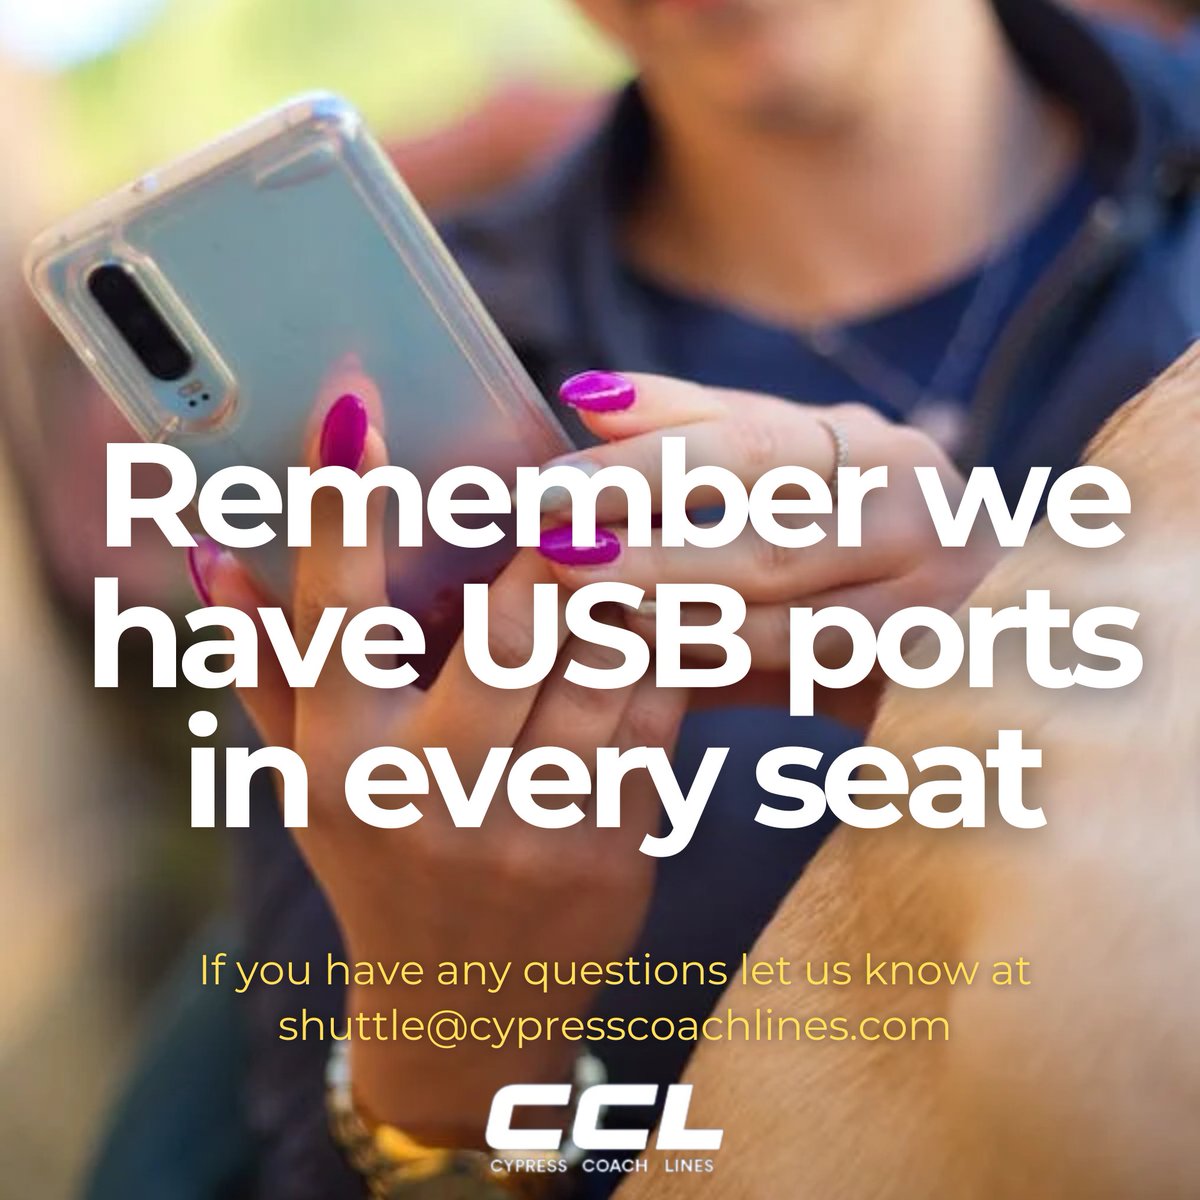 Tired of your devices dying on the road? Fear not! 🚌🔌Hop on our #CypressCoachLines buses and plug into our USB ports in every seat for a fully charged ride!

BOOK ONLINE TODAY! bit.ly/3Inqoyw

#bus #bustrip #vancouver #travelsafe #nature #tourism #vancouvertourism